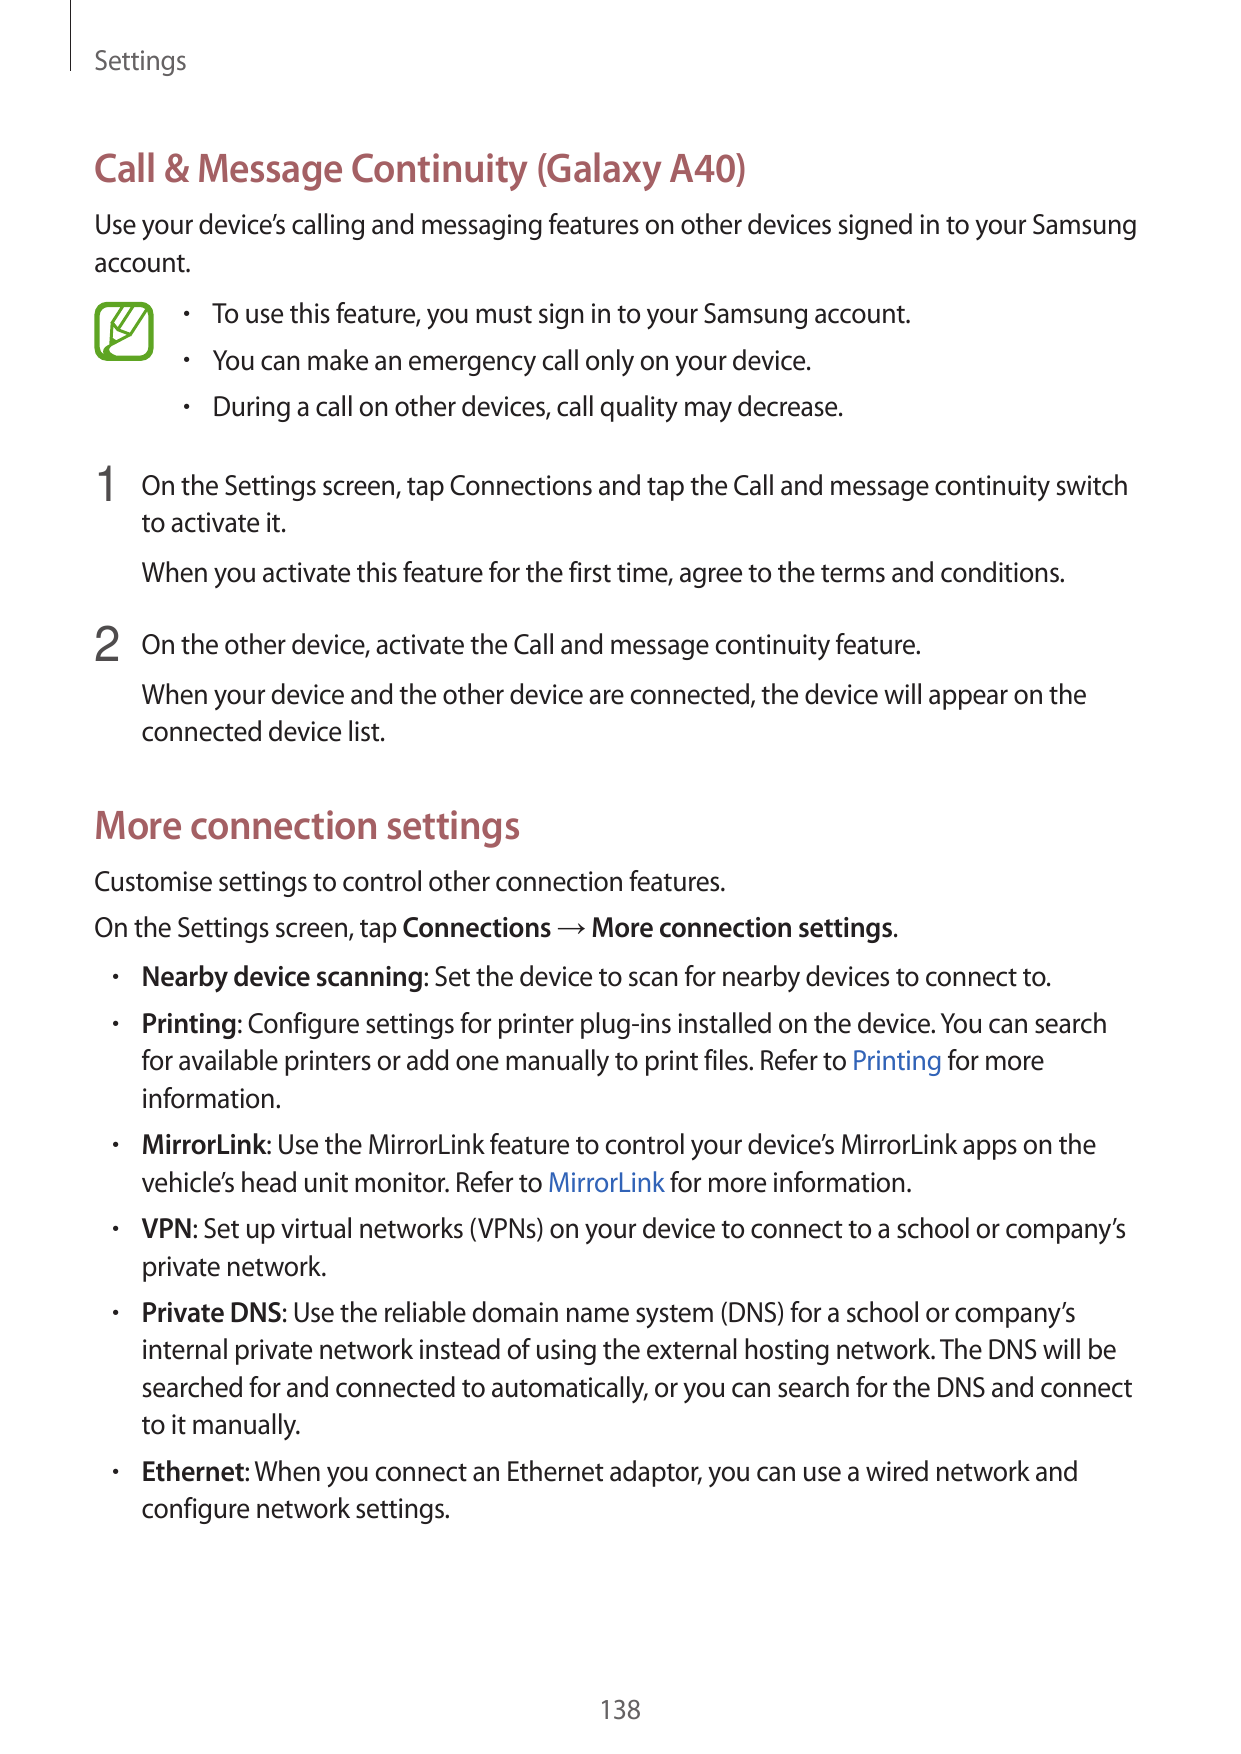 SettingsCall & Message Continuity (Galaxy A40)Use your device’s calling and messaging features on other devices signed in to you